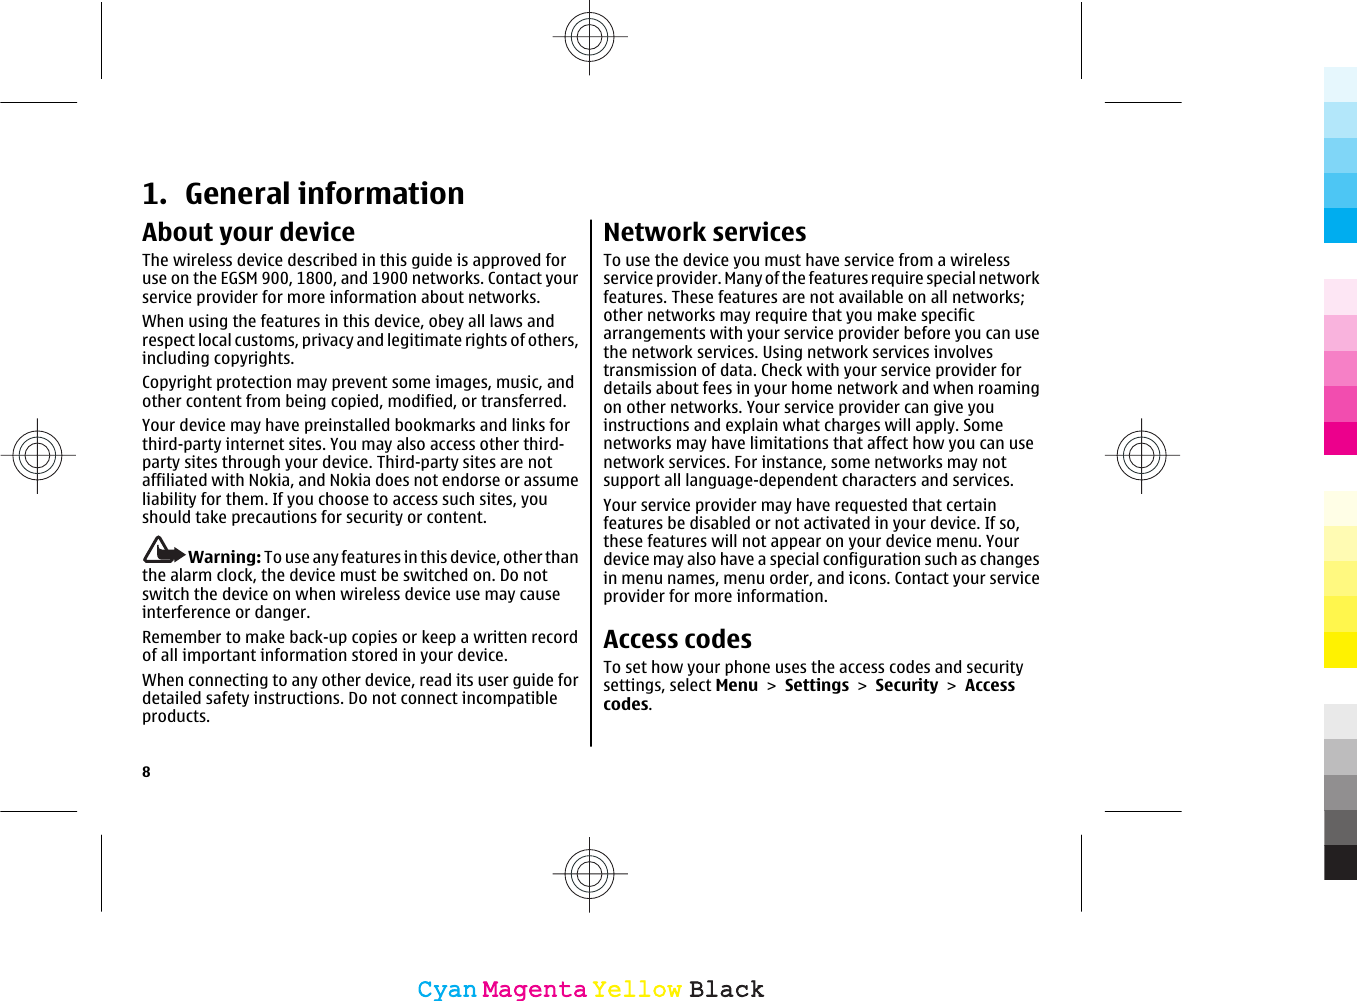 1. General informationAbout your deviceThe wireless device described in this guide is approved foruse on the EGSM 900, 1800, and 1900 networks. Contact yourservice provider for more information about networks.When using the features in this device, obey all laws andrespect local customs, privacy and legitimate rights of others,including copyrights.Copyright protection may prevent some images, music, andother content from being copied, modified, or transferred.Your device may have preinstalled bookmarks and links forthird-party internet sites. You may also access other third-party sites through your device. Third-party sites are notaffiliated with Nokia, and Nokia does not endorse or assumeliability for them. If you choose to access such sites, youshould take precautions for security or content.Warning: To use any features in this device, other thanthe alarm clock, the device must be switched on. Do notswitch the device on when wireless device use may causeinterference or danger.Remember to make back-up copies or keep a written recordof all important information stored in your device.When connecting to any other device, read its user guide fordetailed safety instructions. Do not connect incompatibleproducts.Network servicesTo use the device you must have service from a wirelessservice provider. Many of the features require special networkfeatures. These features are not available on all networks;other networks may require that you make specificarrangements with your service provider before you can usethe network services. Using network services involvestransmission of data. Check with your service provider fordetails about fees in your home network and when roamingon other networks. Your service provider can give youinstructions and explain what charges will apply. Somenetworks may have limitations that affect how you can usenetwork services. For instance, some networks may notsupport all language-dependent characters and services.Your service provider may have requested that certainfeatures be disabled or not activated in your device. If so,these features will not appear on your device menu. Yourdevice may also have a special configuration such as changesin menu names, menu order, and icons. Contact your serviceprovider for more information.Access codesTo set how your phone uses the access codes and securitysettings, select Menu &gt; Settings &gt; Security &gt; Accesscodes.8CyanCyanMagentaMagentaYellowYellowBlackBlack